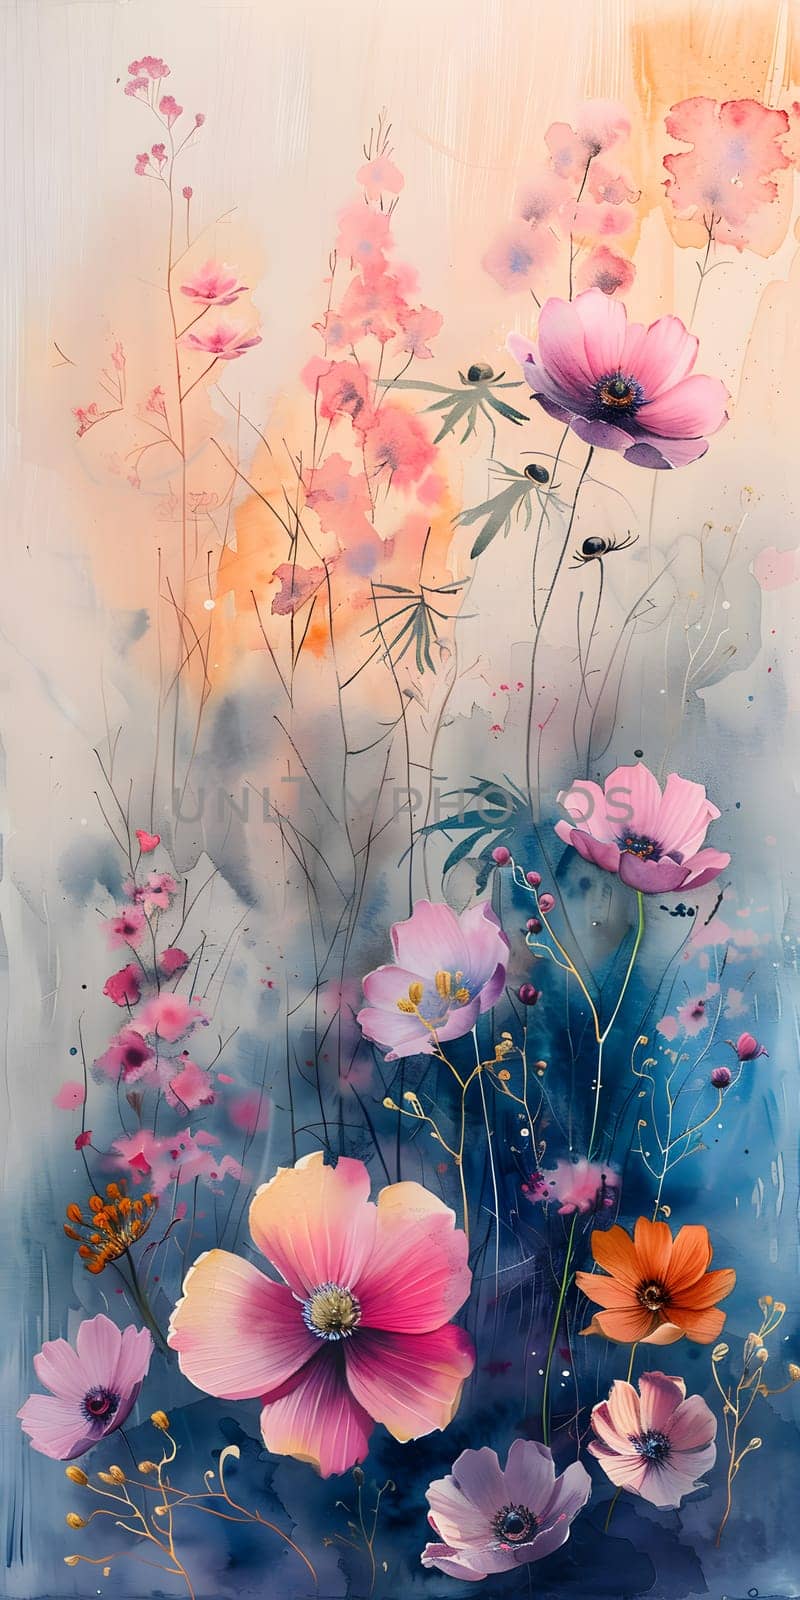 A creative art piece depicting pink flowers on a magenta background. This painting showcases the beauty of flowering plants and the art of flower arranging